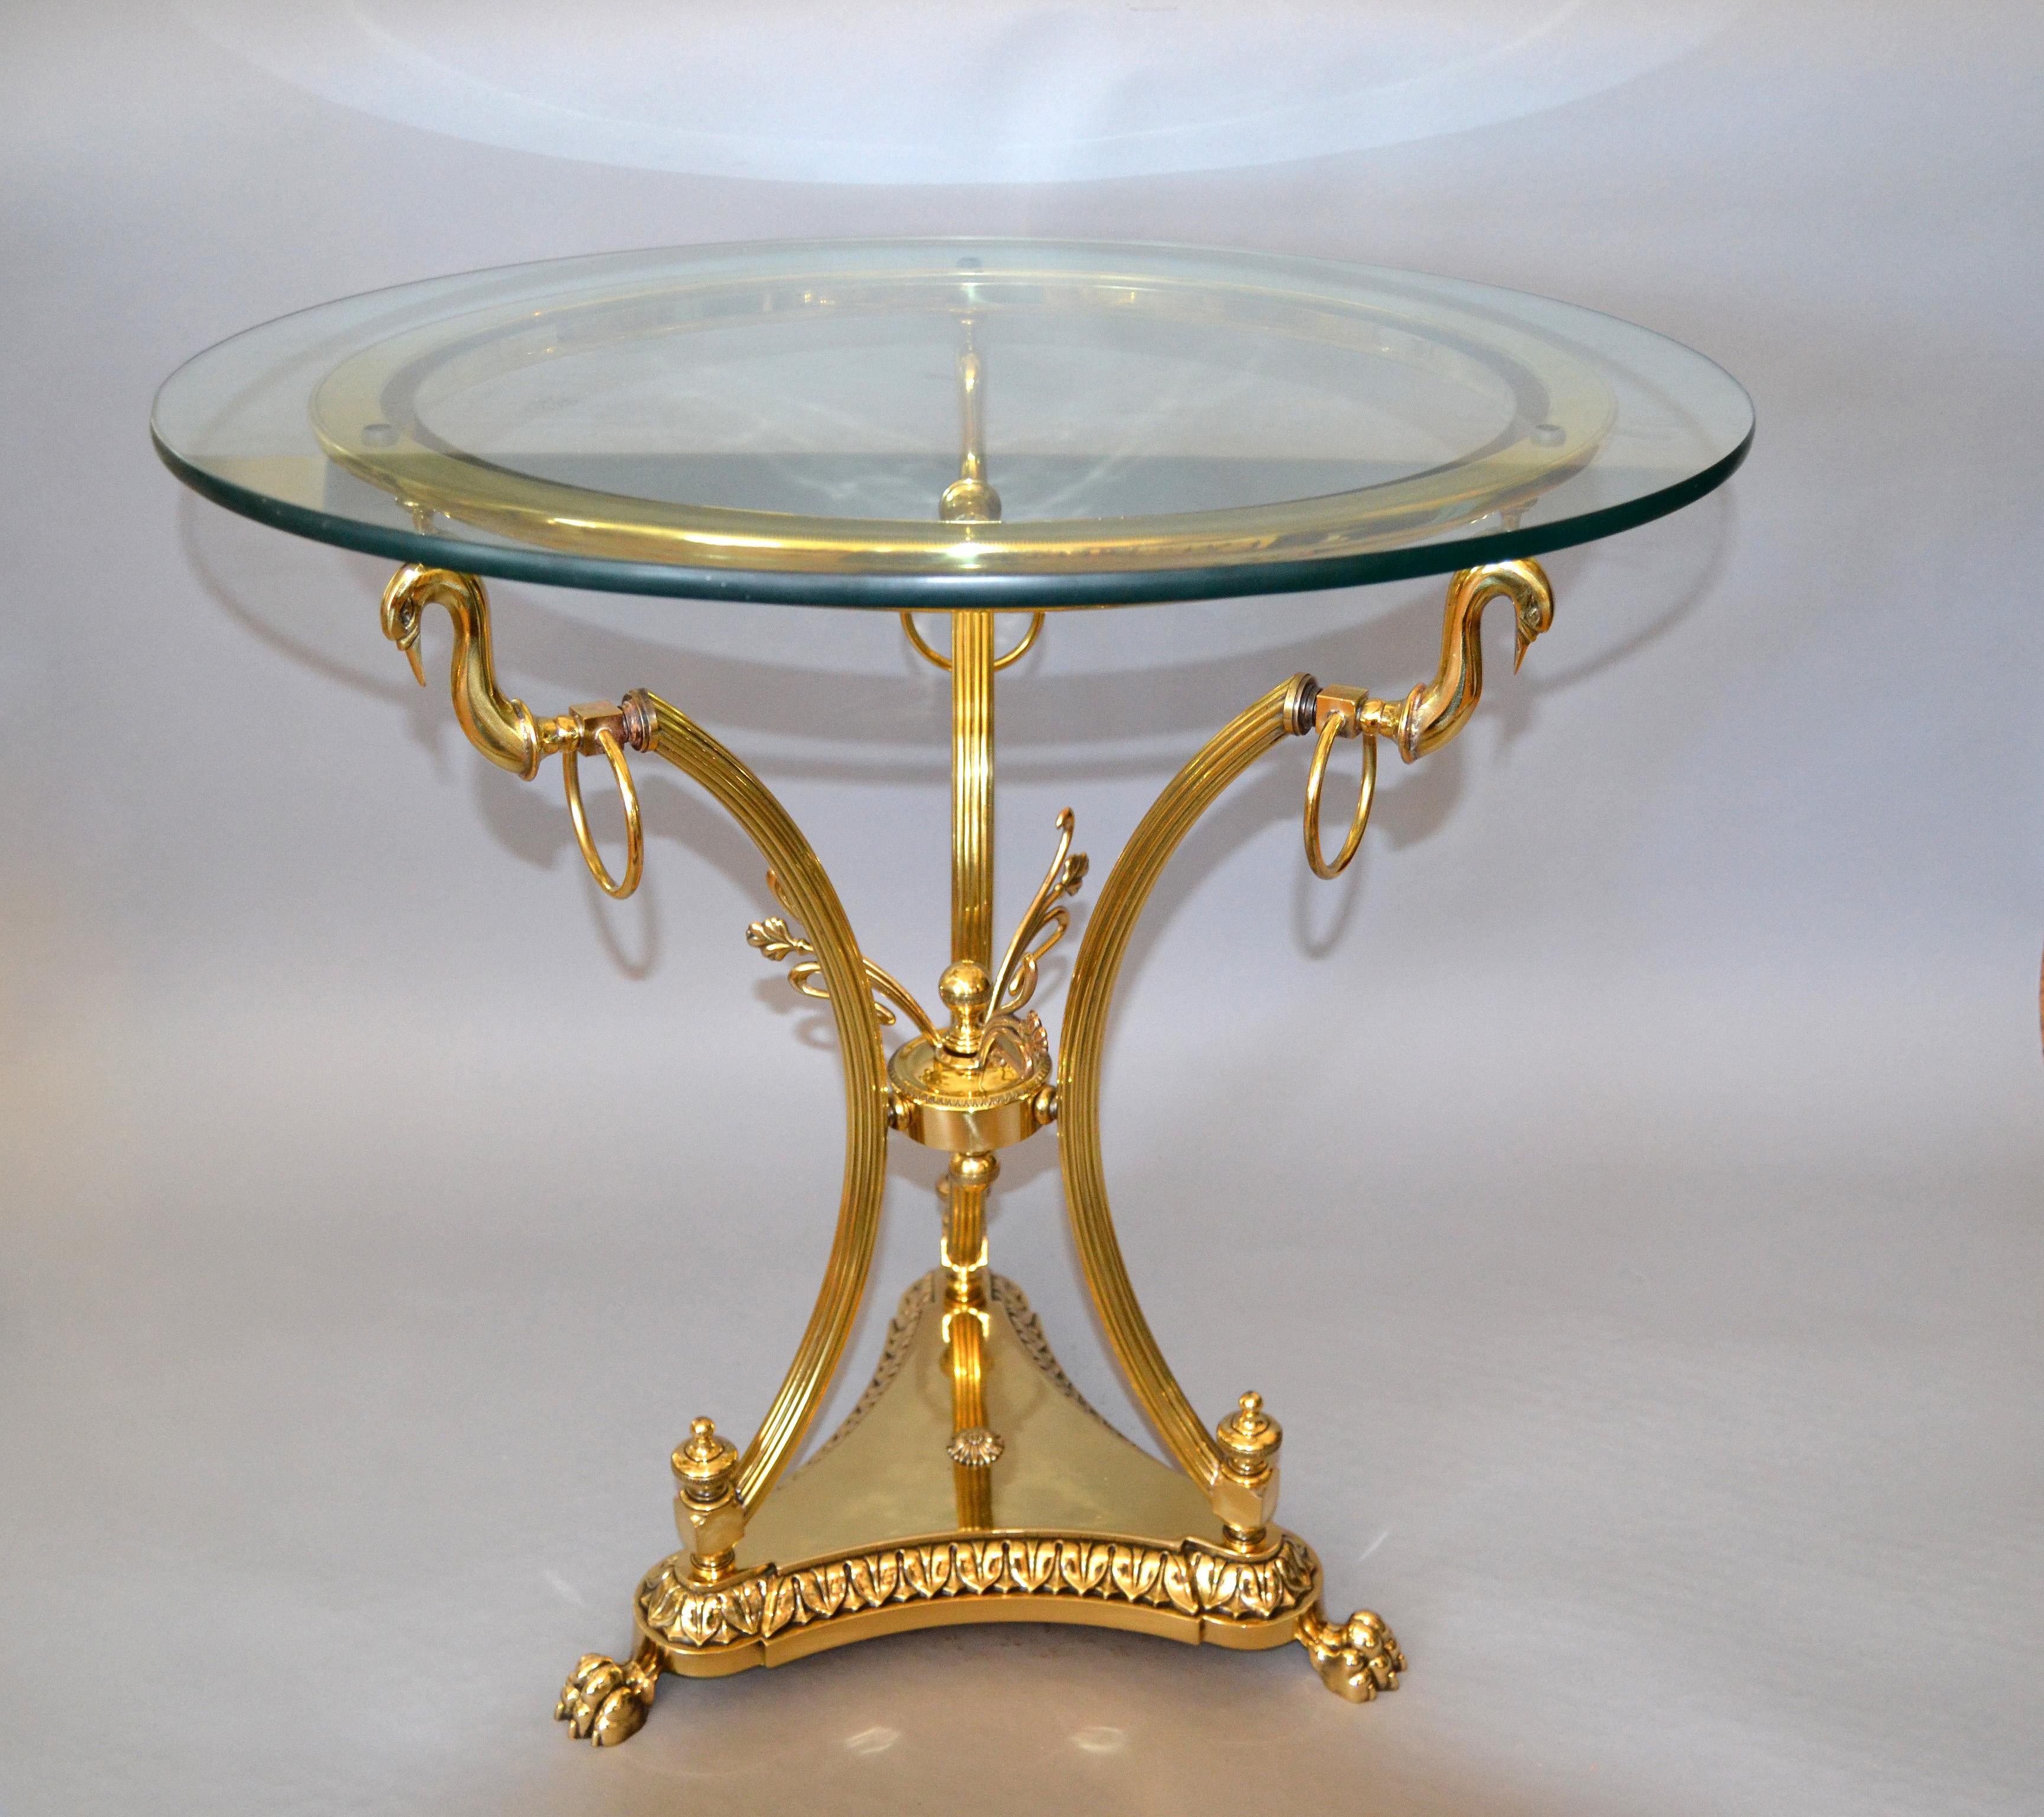 Hollywood Regency cast brass claw feet round glass side table.
Note the brass swans and other details on this side table.

Dimensions are without the glass top.

 